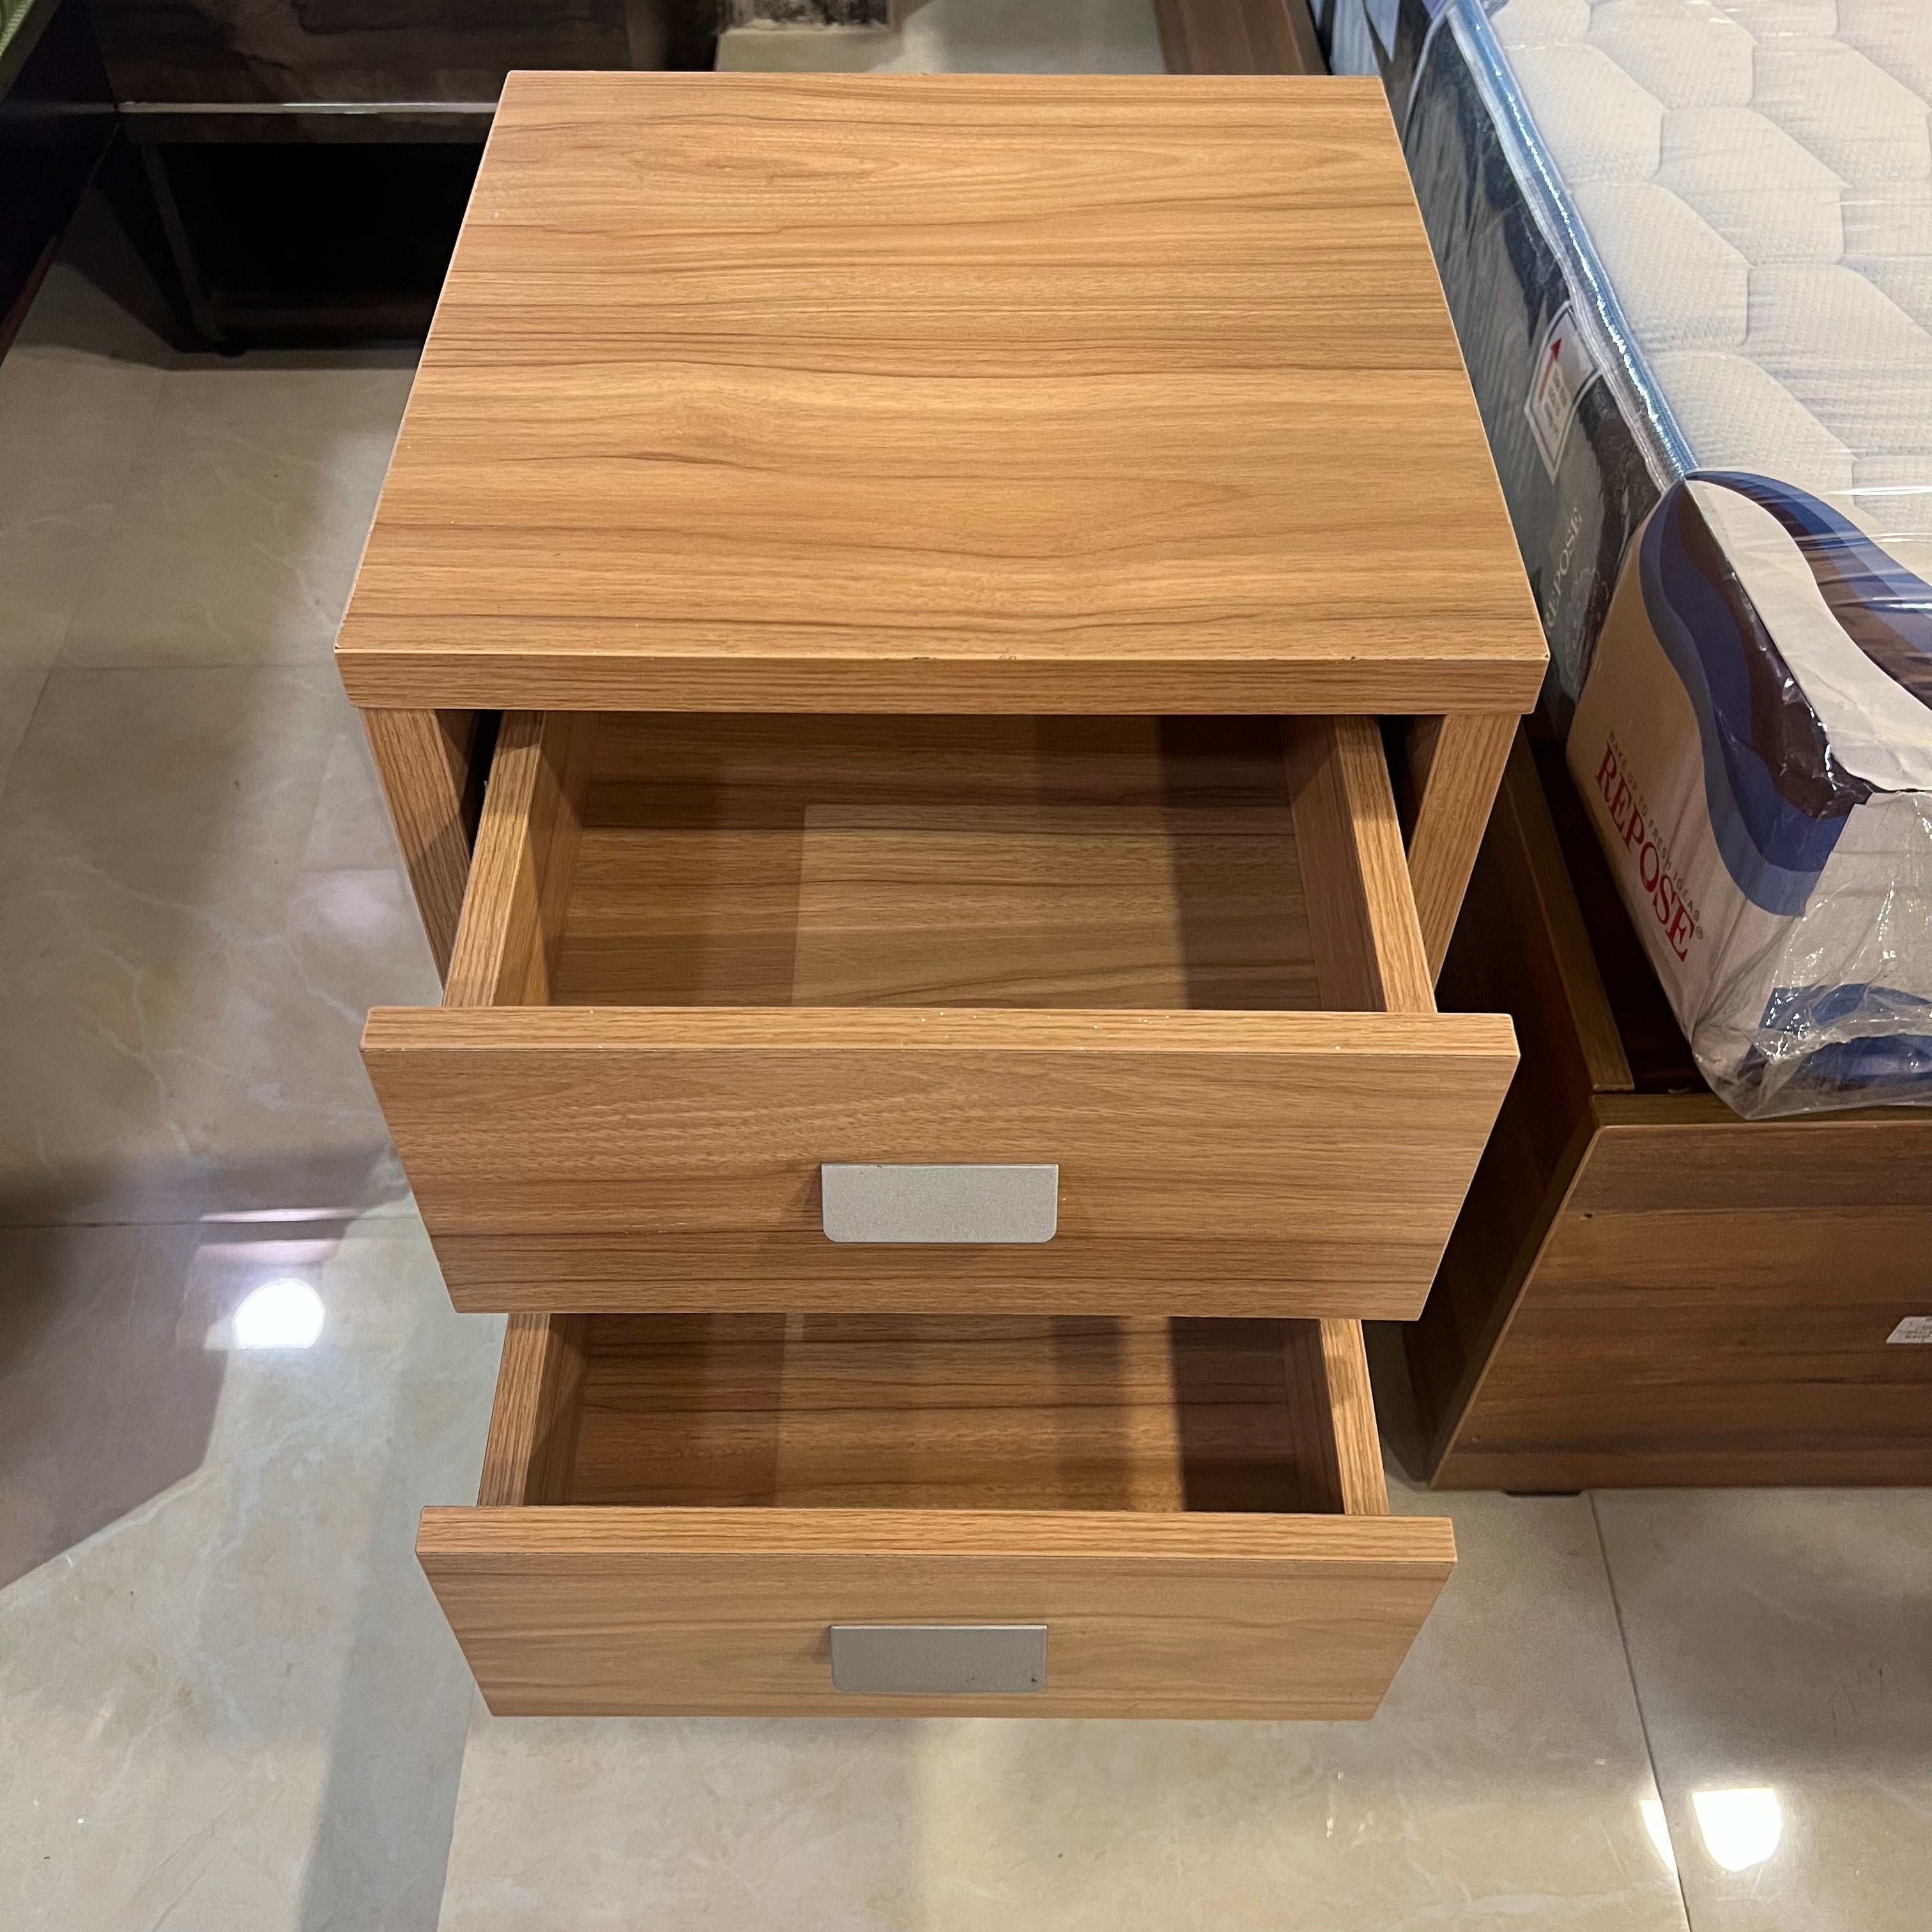 Engineering Wood Bedside Table without Locker